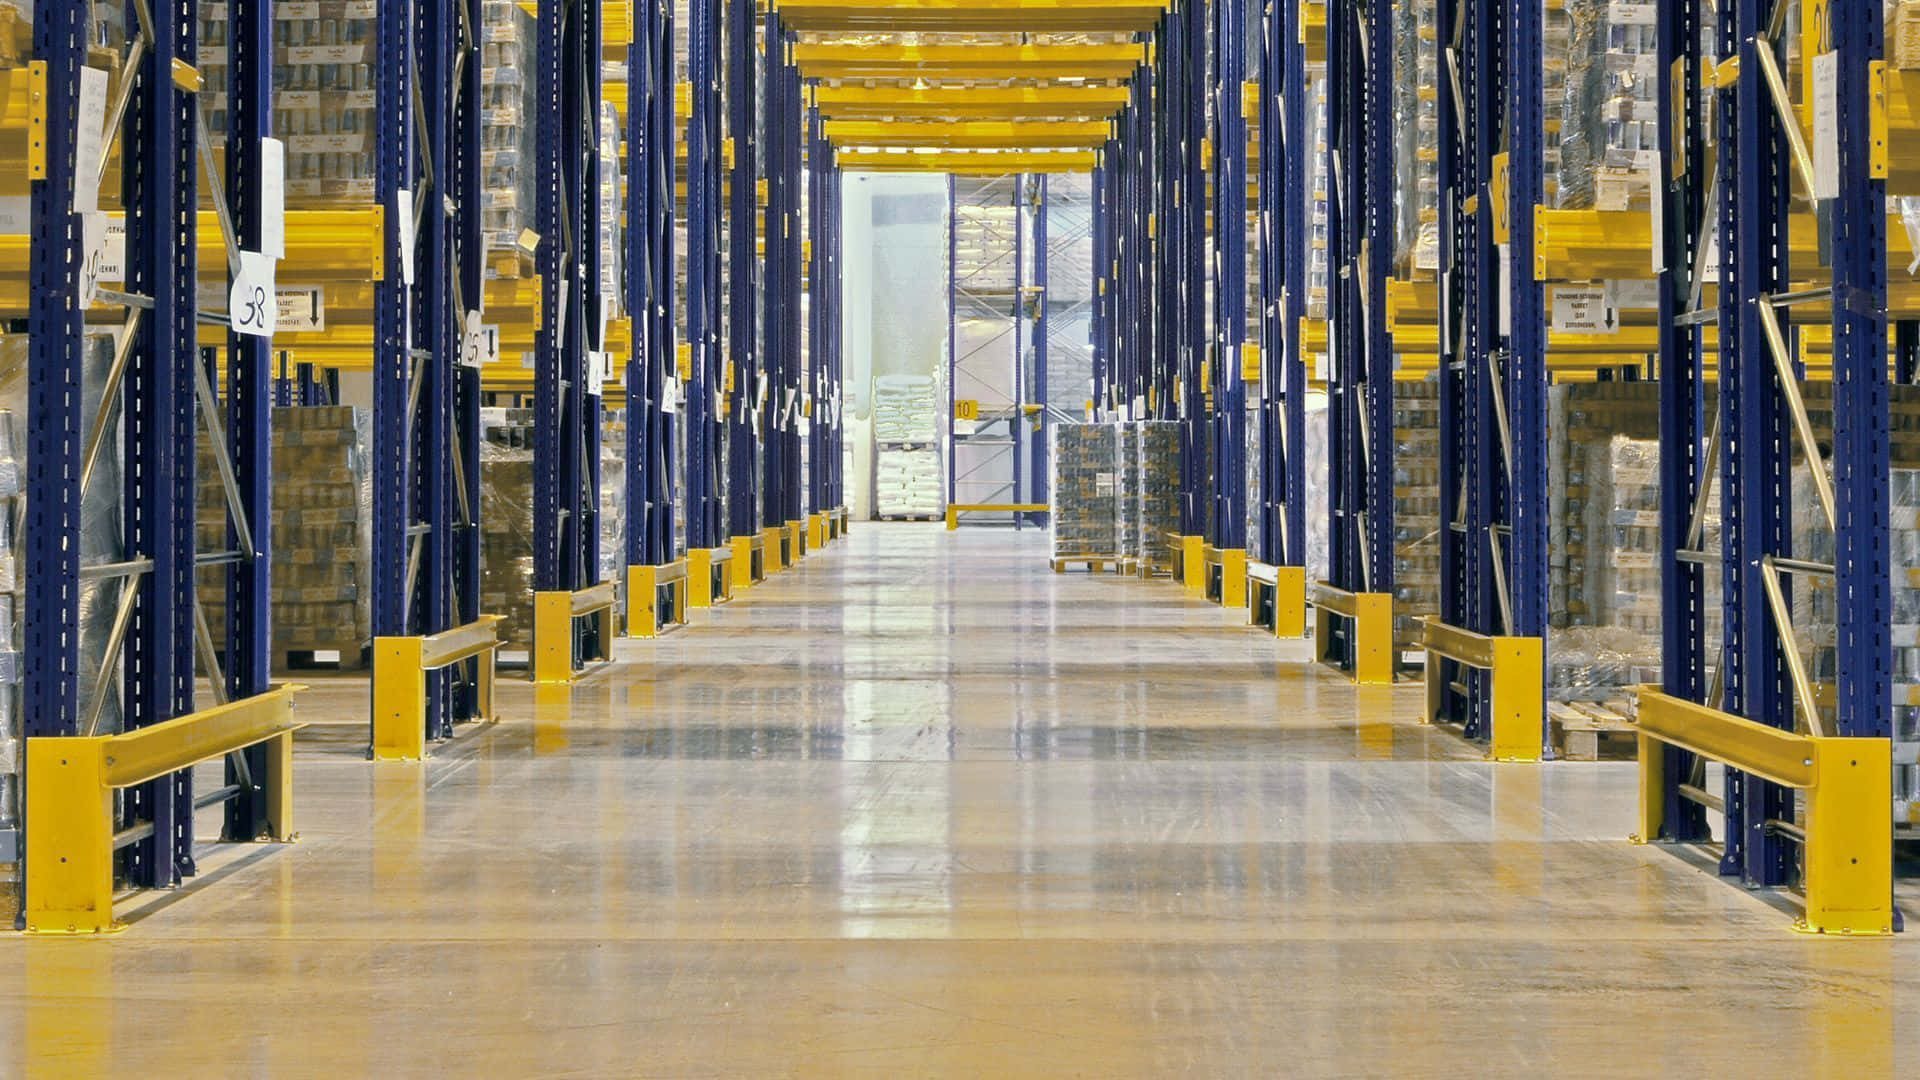 A Warehouse With Yellow And Blue Shelving